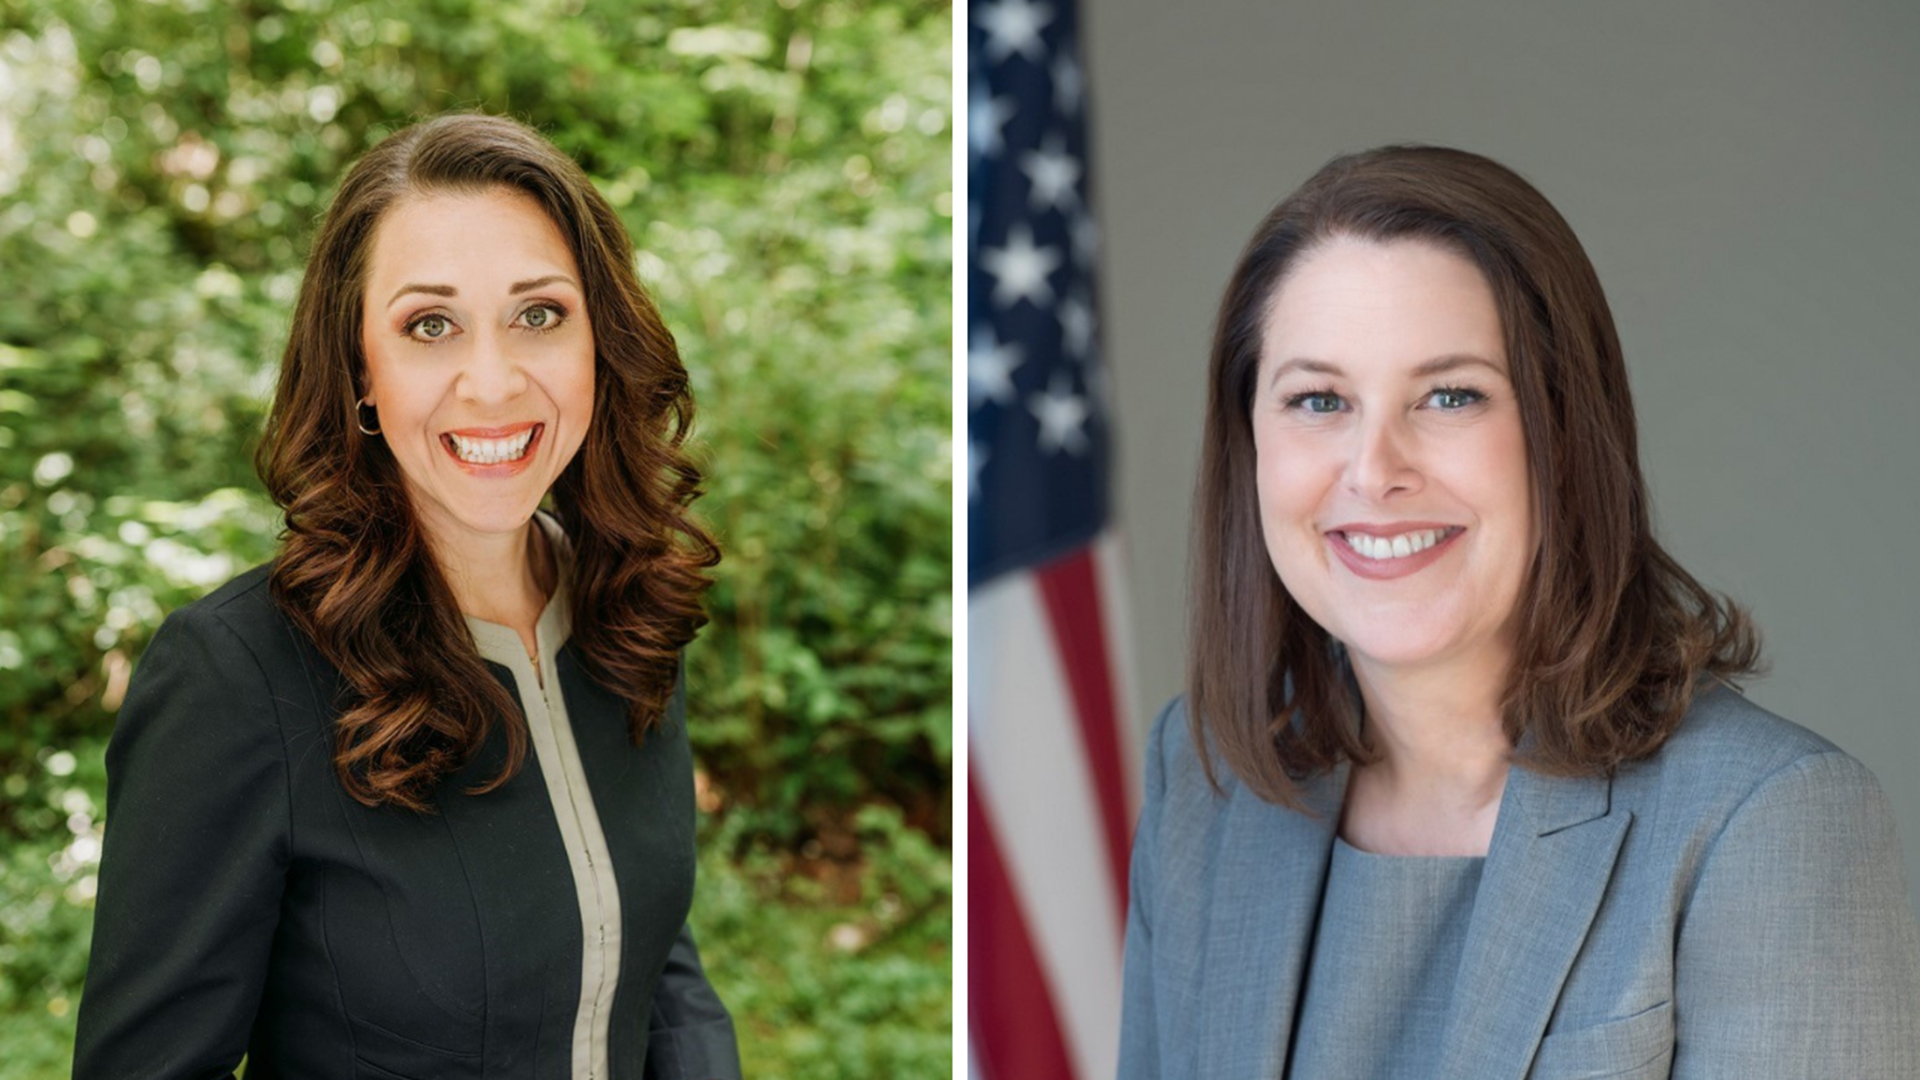 For the second time, Democrat Carolyn Long is challenging Republican Jaime Herrera Beutler to represent Washington's 3rd Congressional District.